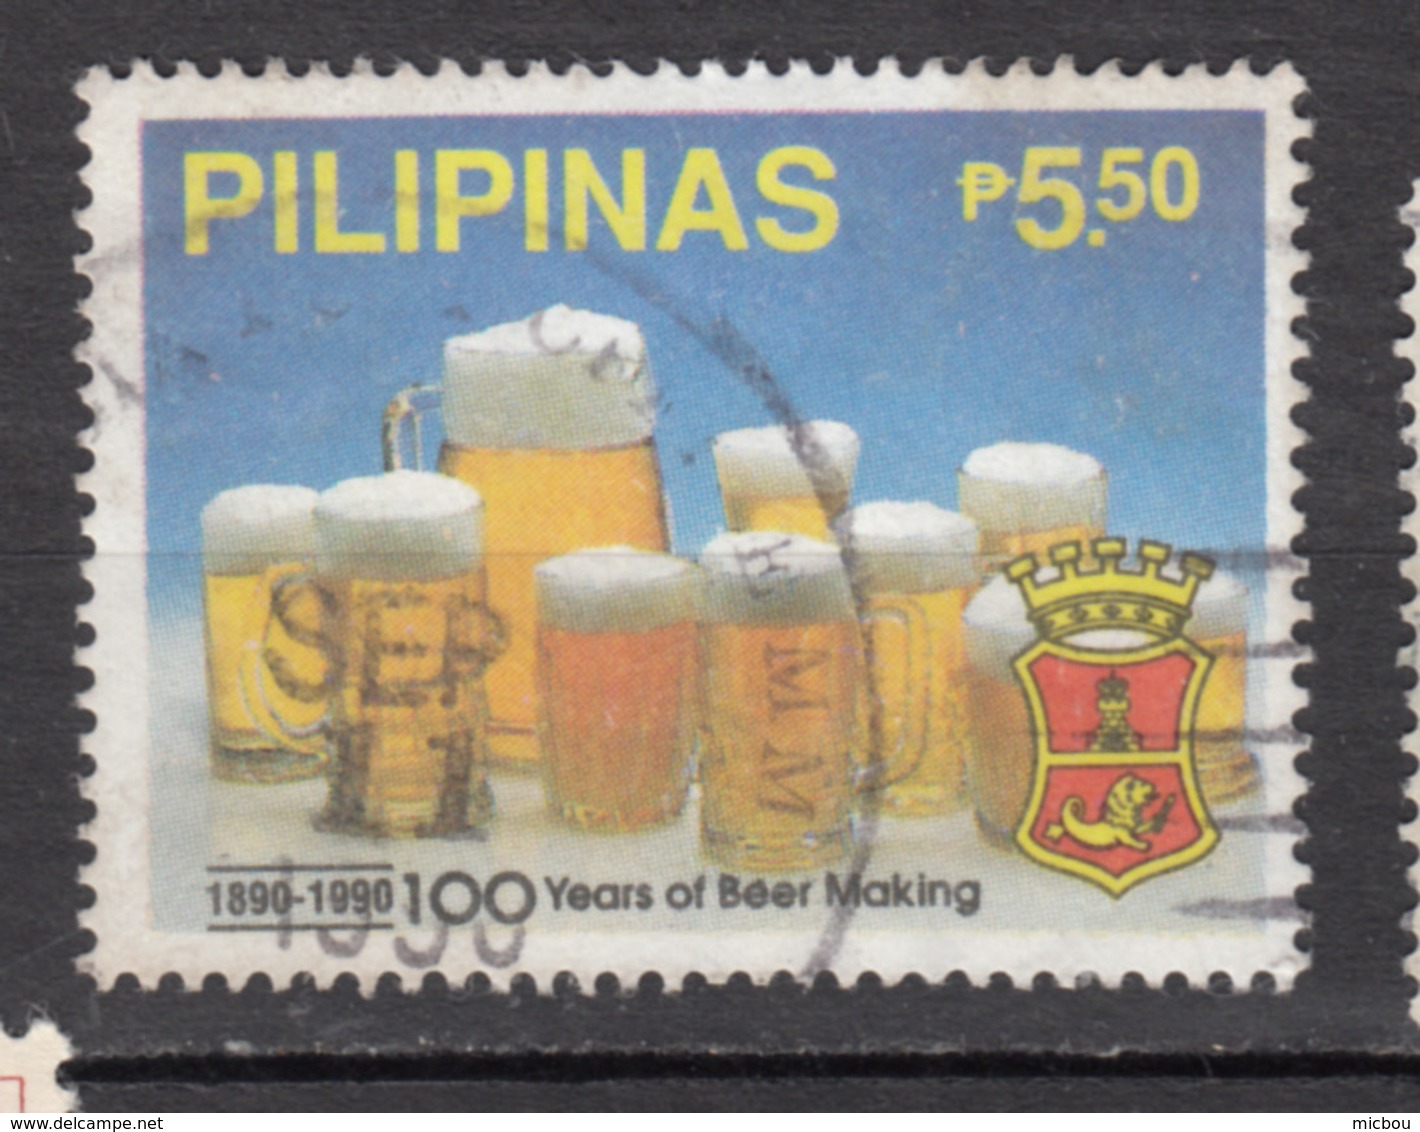 Philippines, Pilipinas, Bière, Beer, Alcohol, Alcool, Sirene, Mermaid, Verre, Glass - Bières